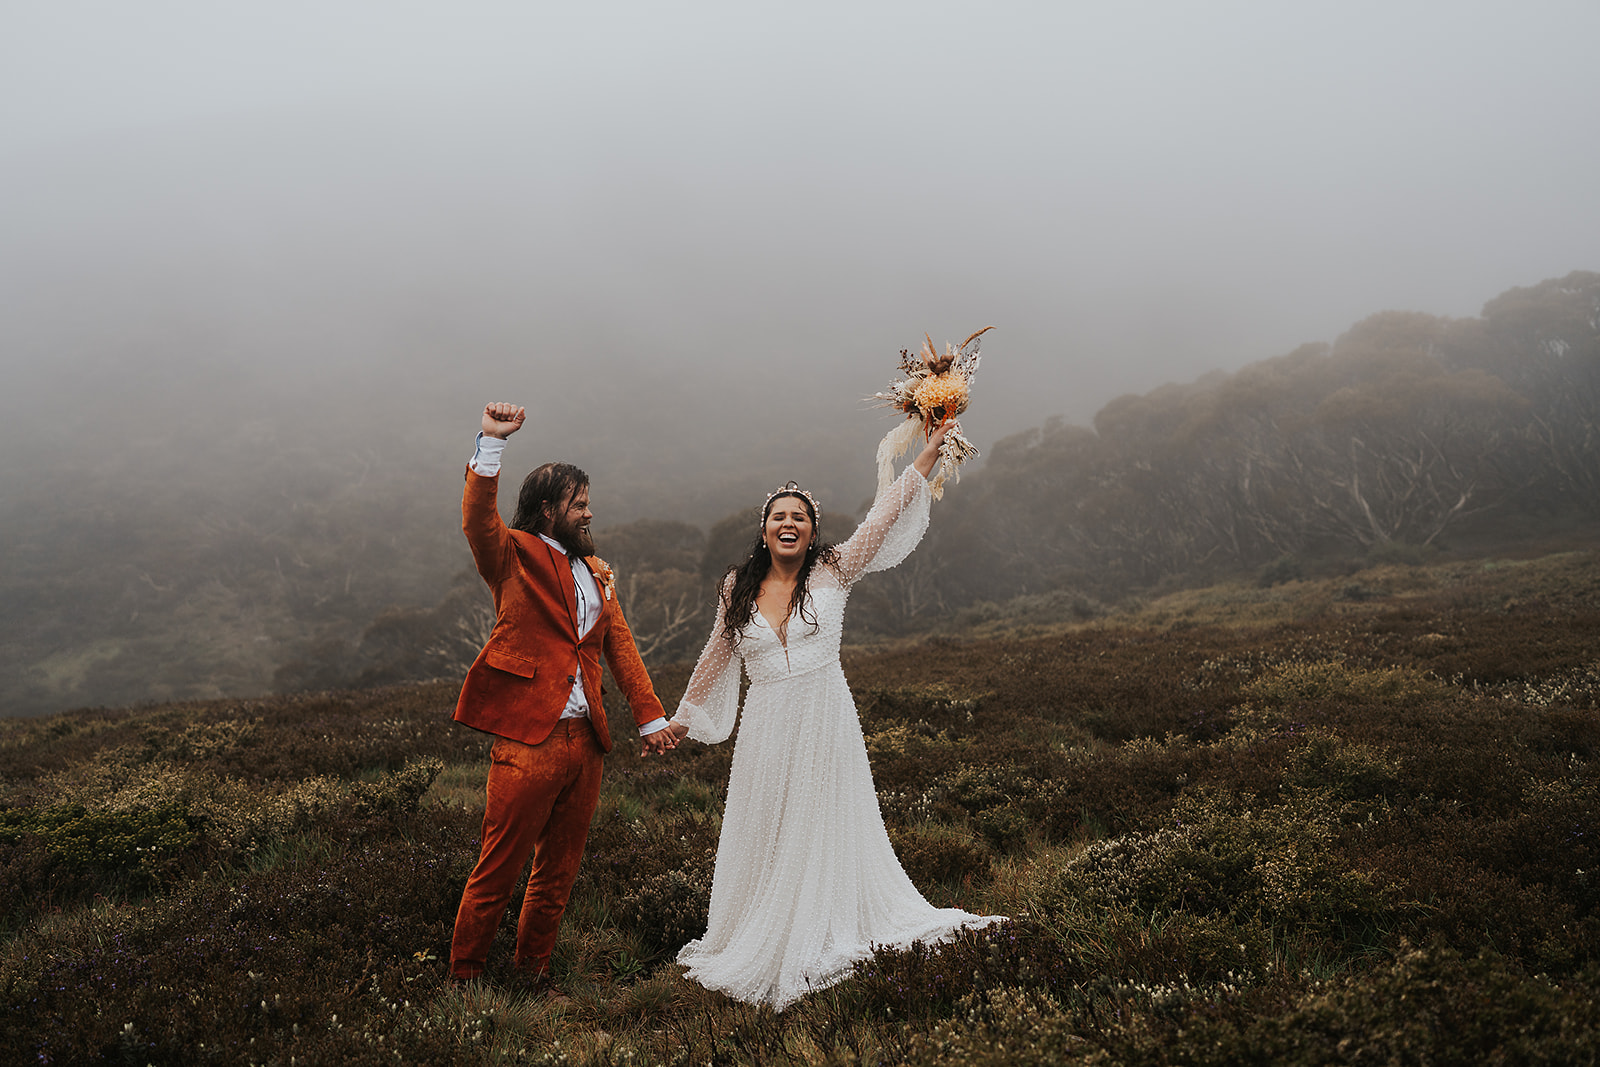 The bride and groom celebrate their elopement on Mount Hotham.